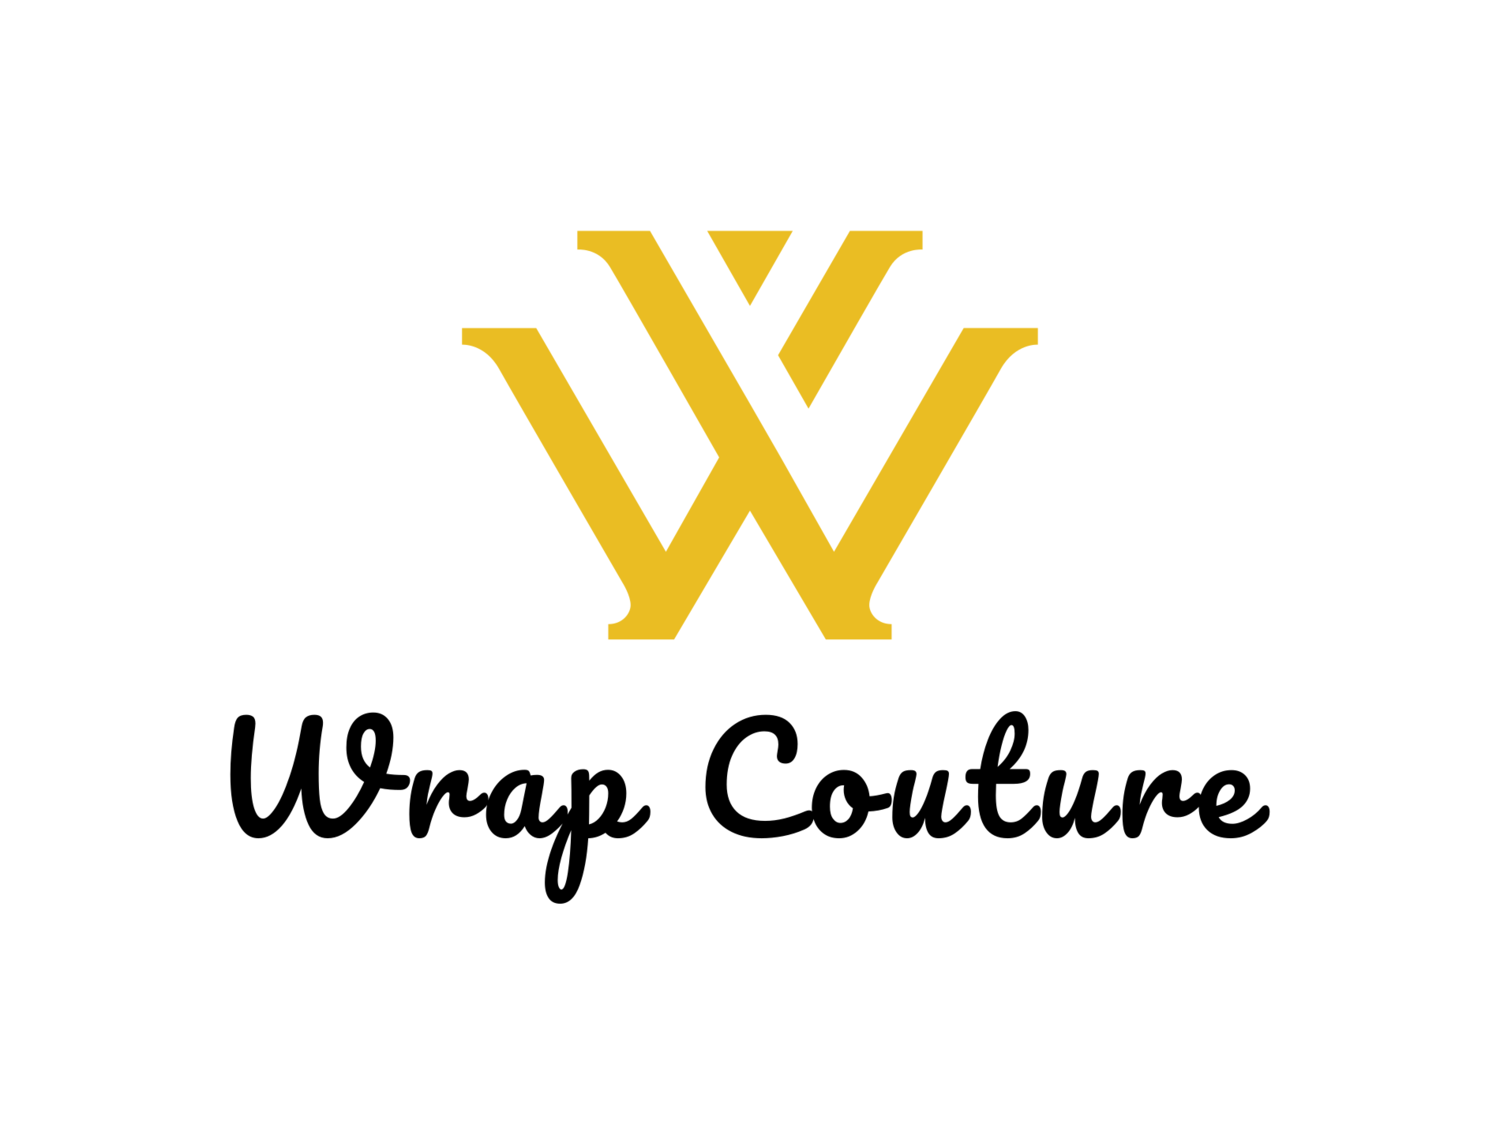 Wrap Couture